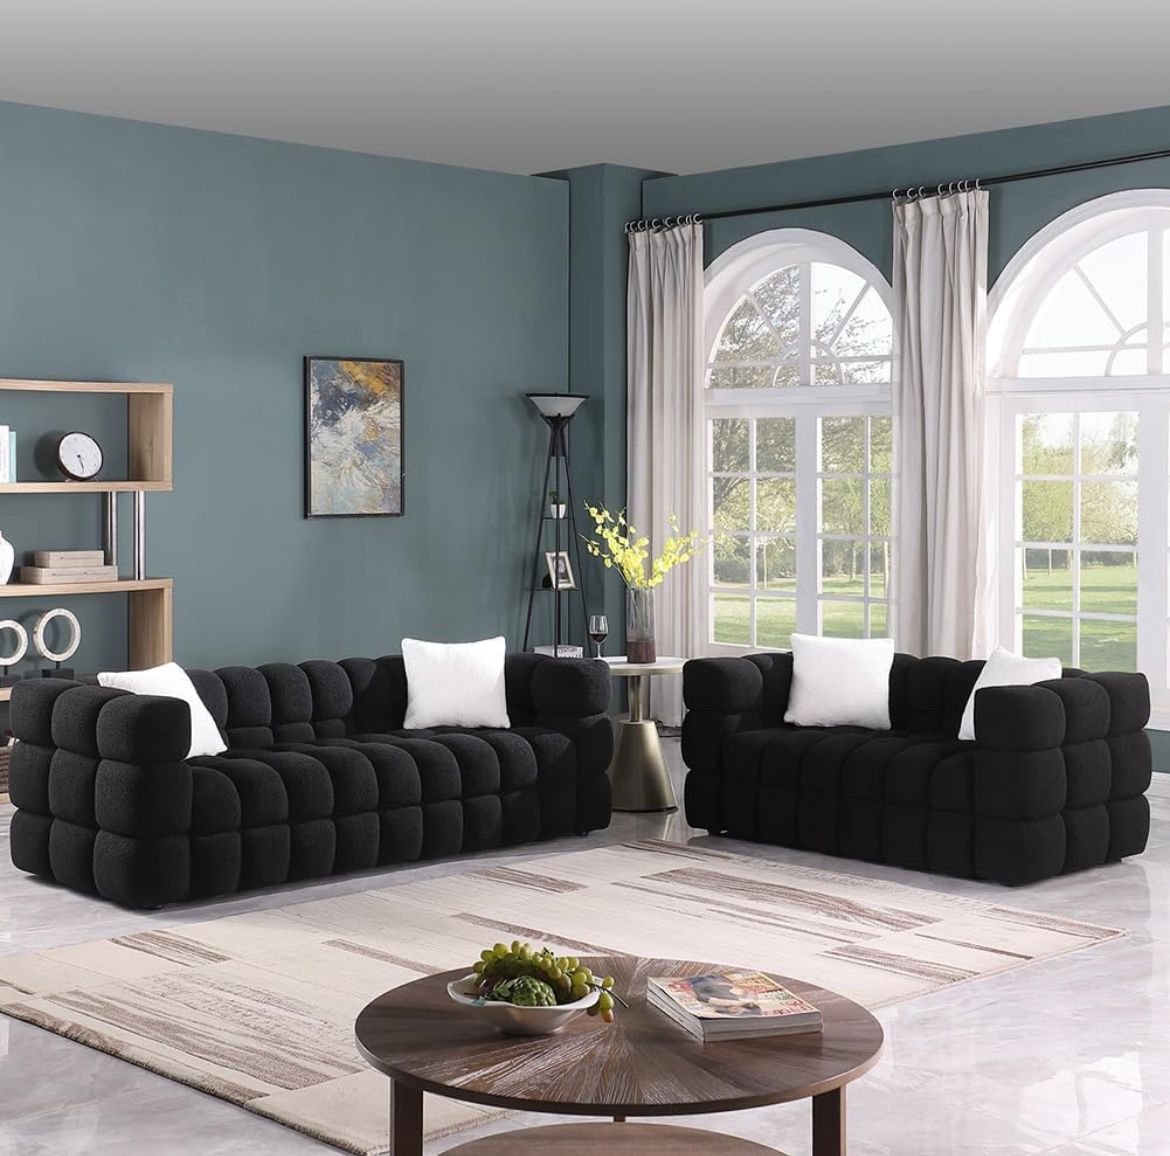 2 Piece Sectional Couches for Living Room Set, 62" Modern Loveseat & 84" 3 Seater Cloud Sofa with 4 Accent Pillows, Comfy Boucle Fabric, Black